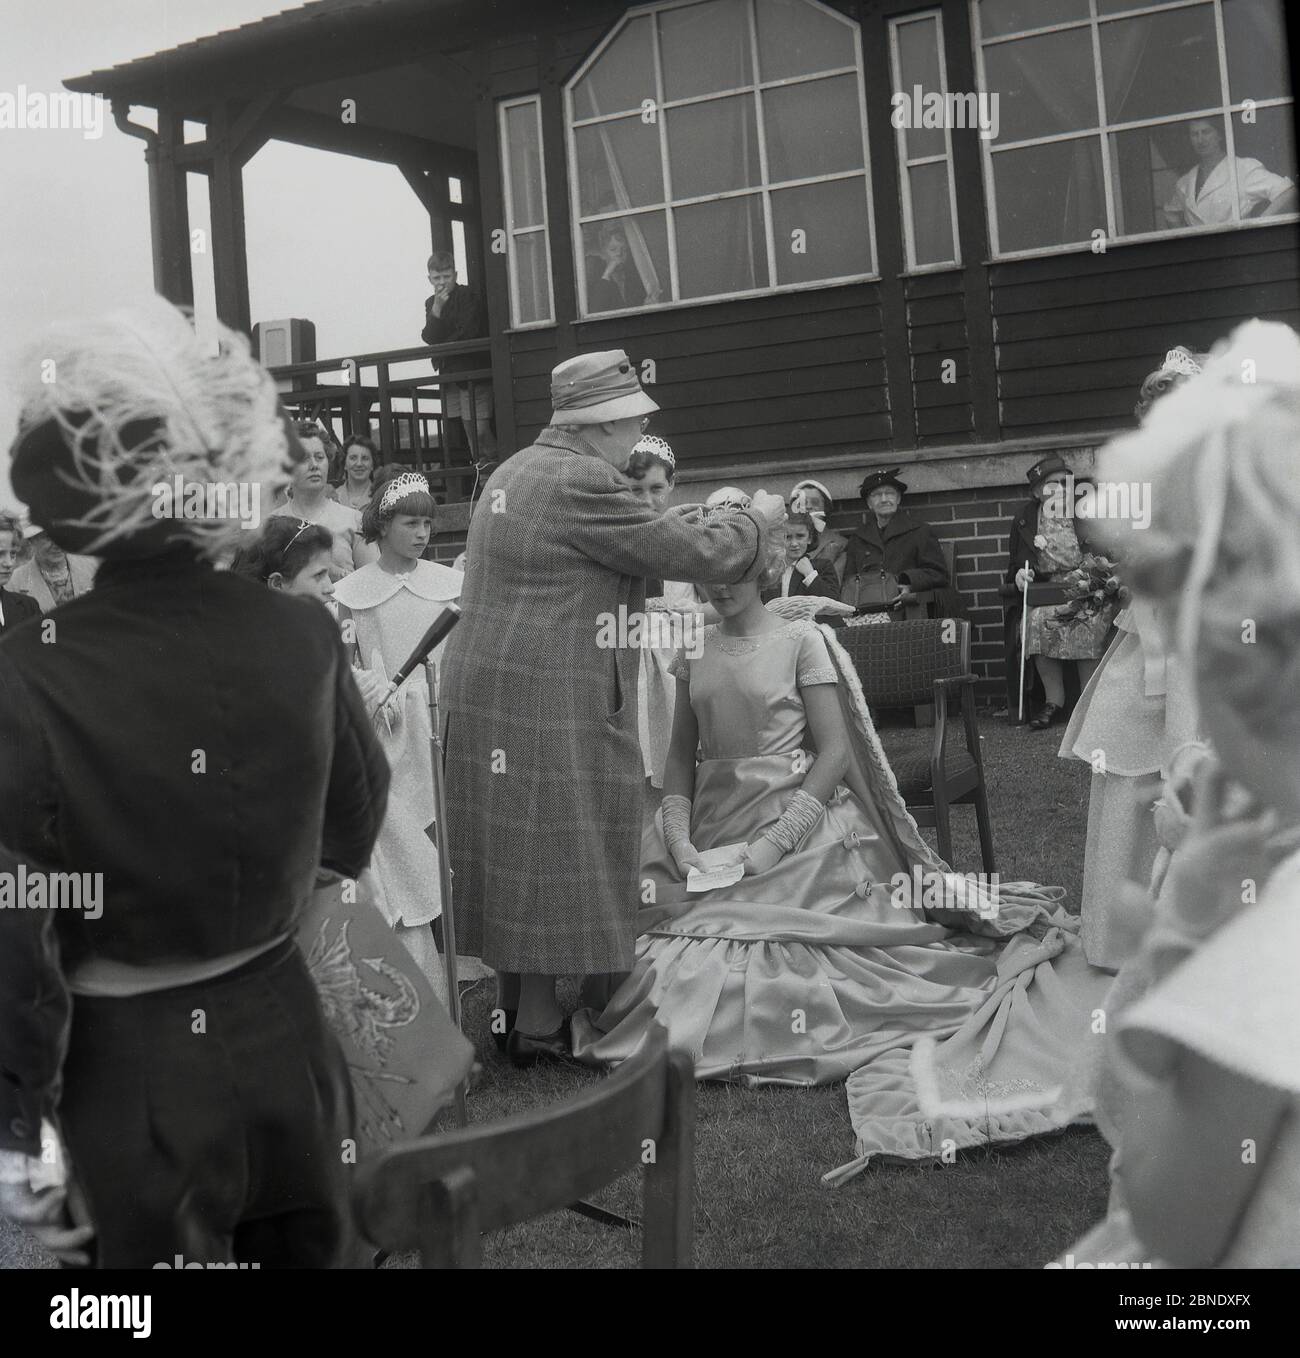 1950s, historical, on the grass outside a wooden sports pavillion at Farnworth, Lancashire, activity as the crowning of the town's Rose Queen', takes place. In a gown and wearing a tiara, a young girl will lead the traditional procession or parade known as a 'Walking Day', celebrations which were common in the North West of England, UK in this era. An annual event, some date back to the 1830s where they were church parades and many are still held today. Stock Photo